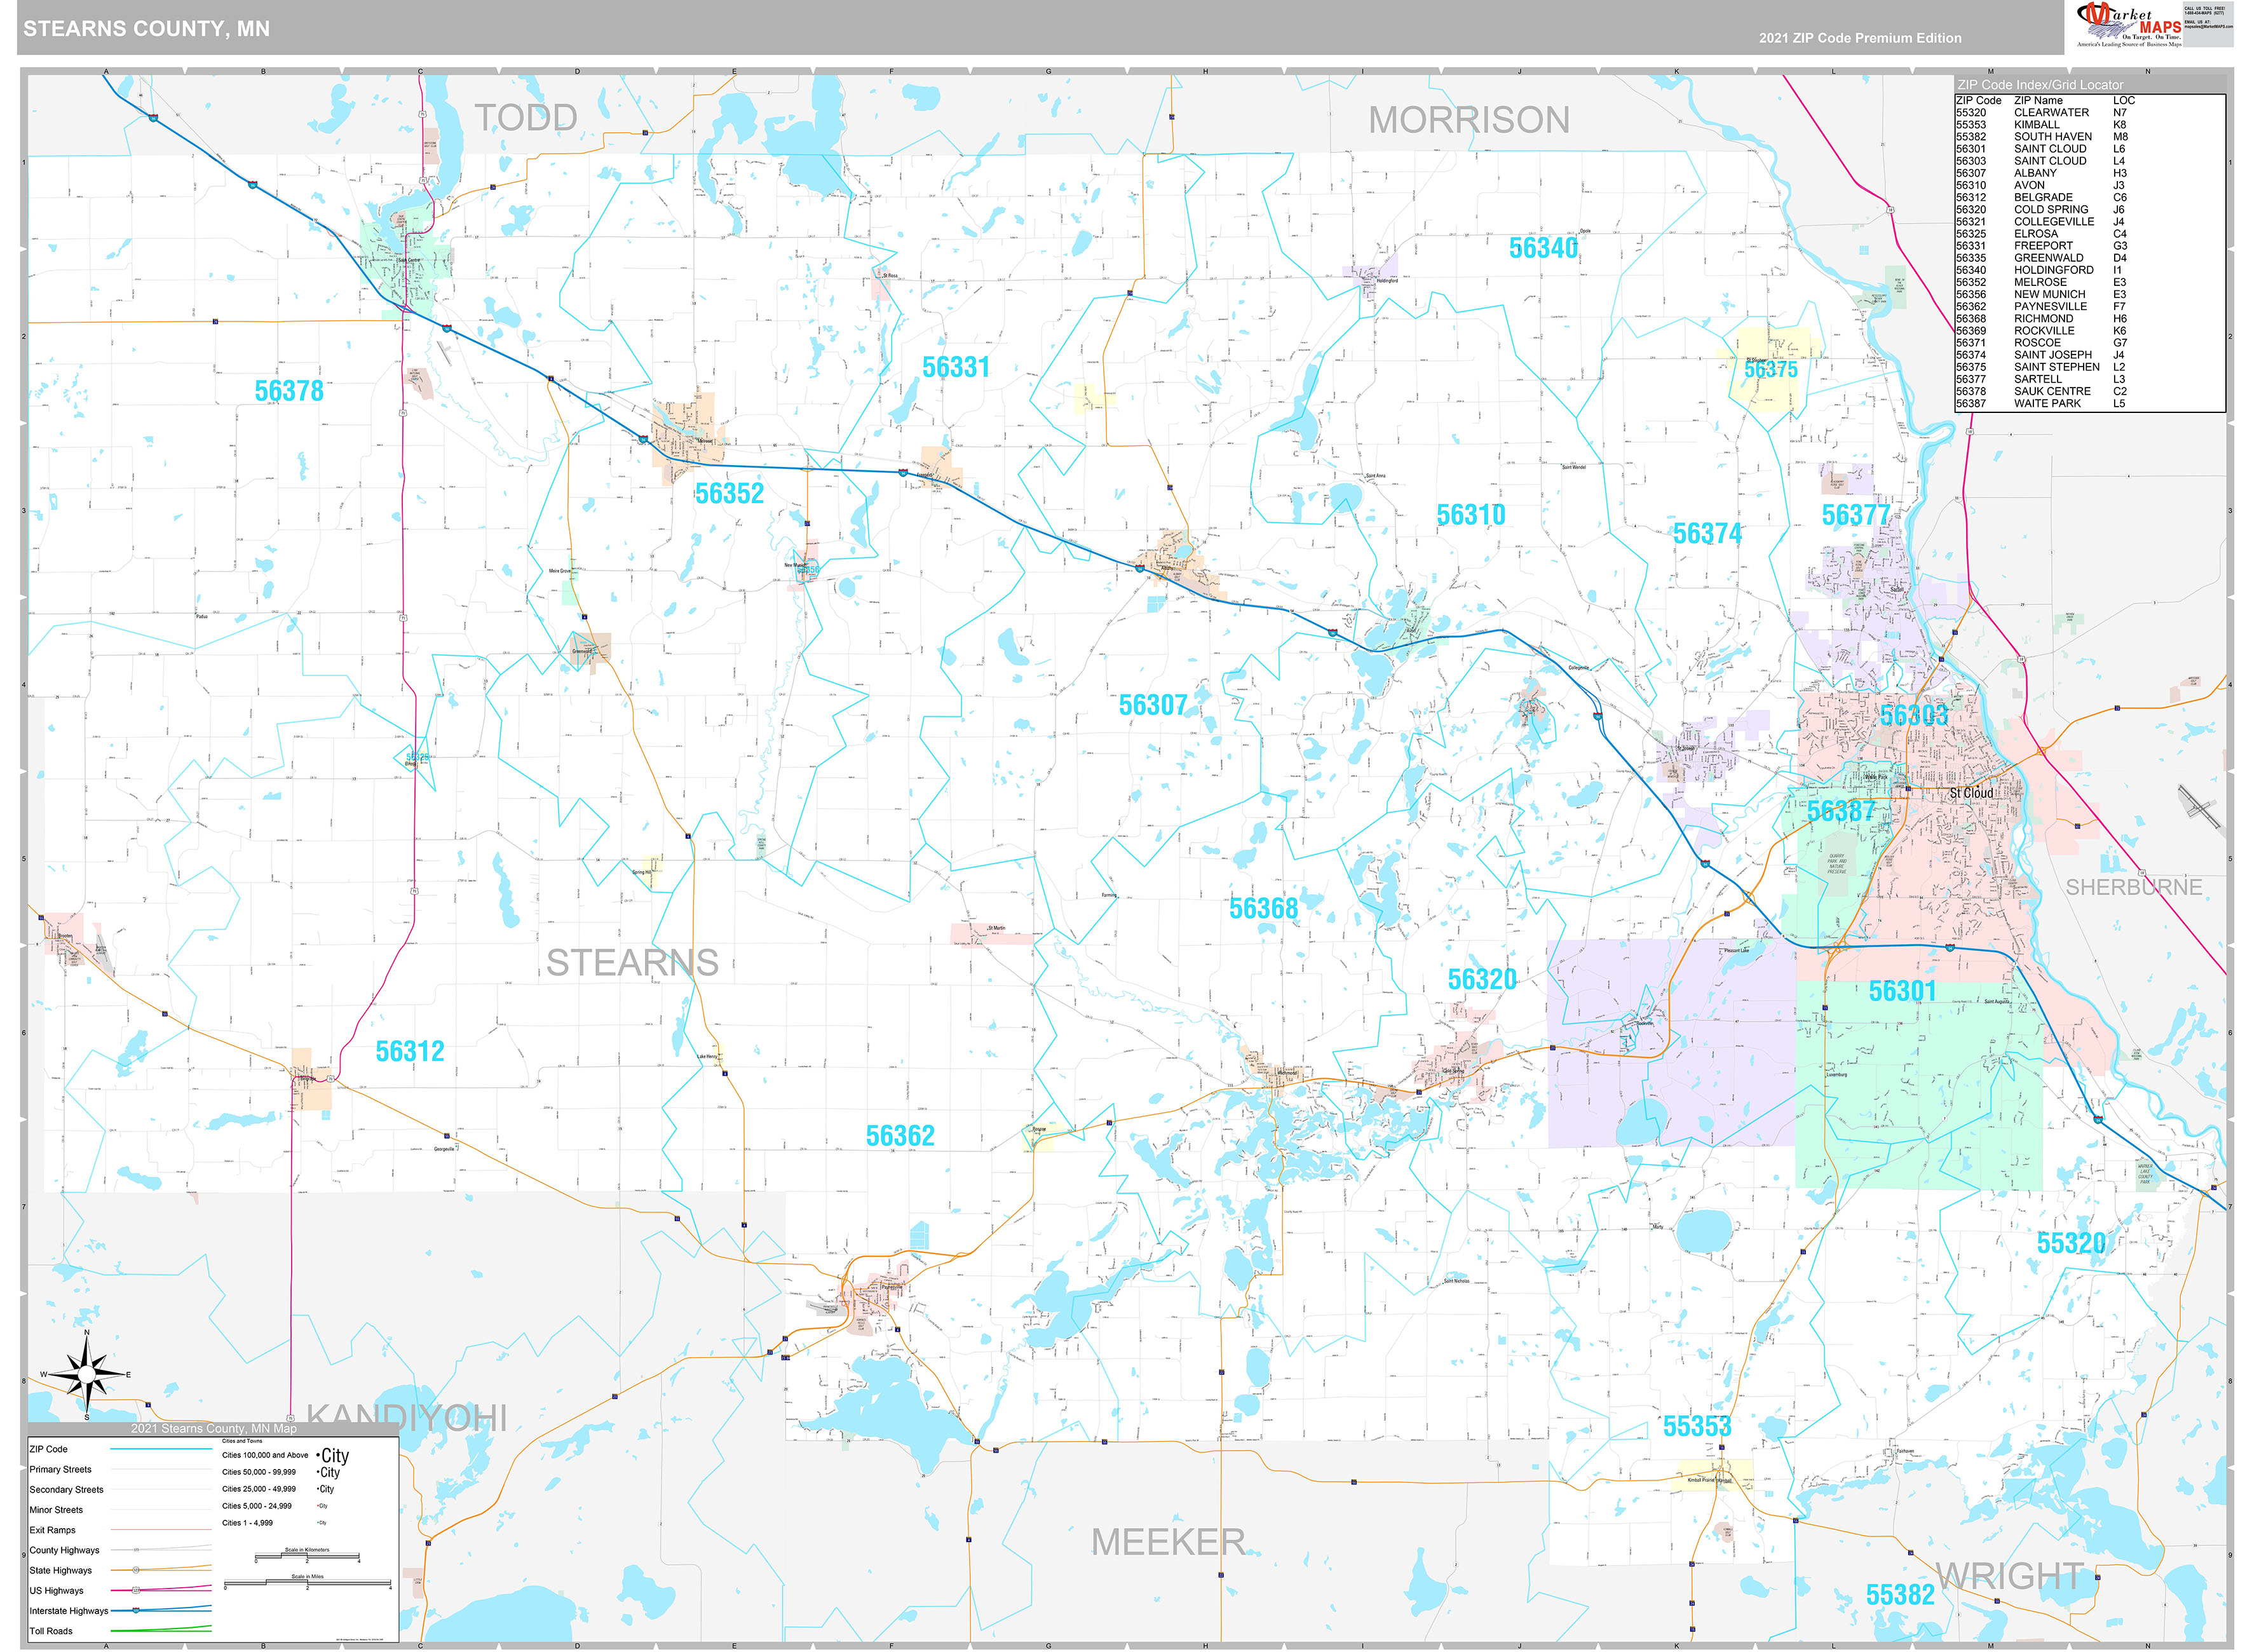 Stearns County, MN Wall Map Premium Style by MarketMAPS MapSales